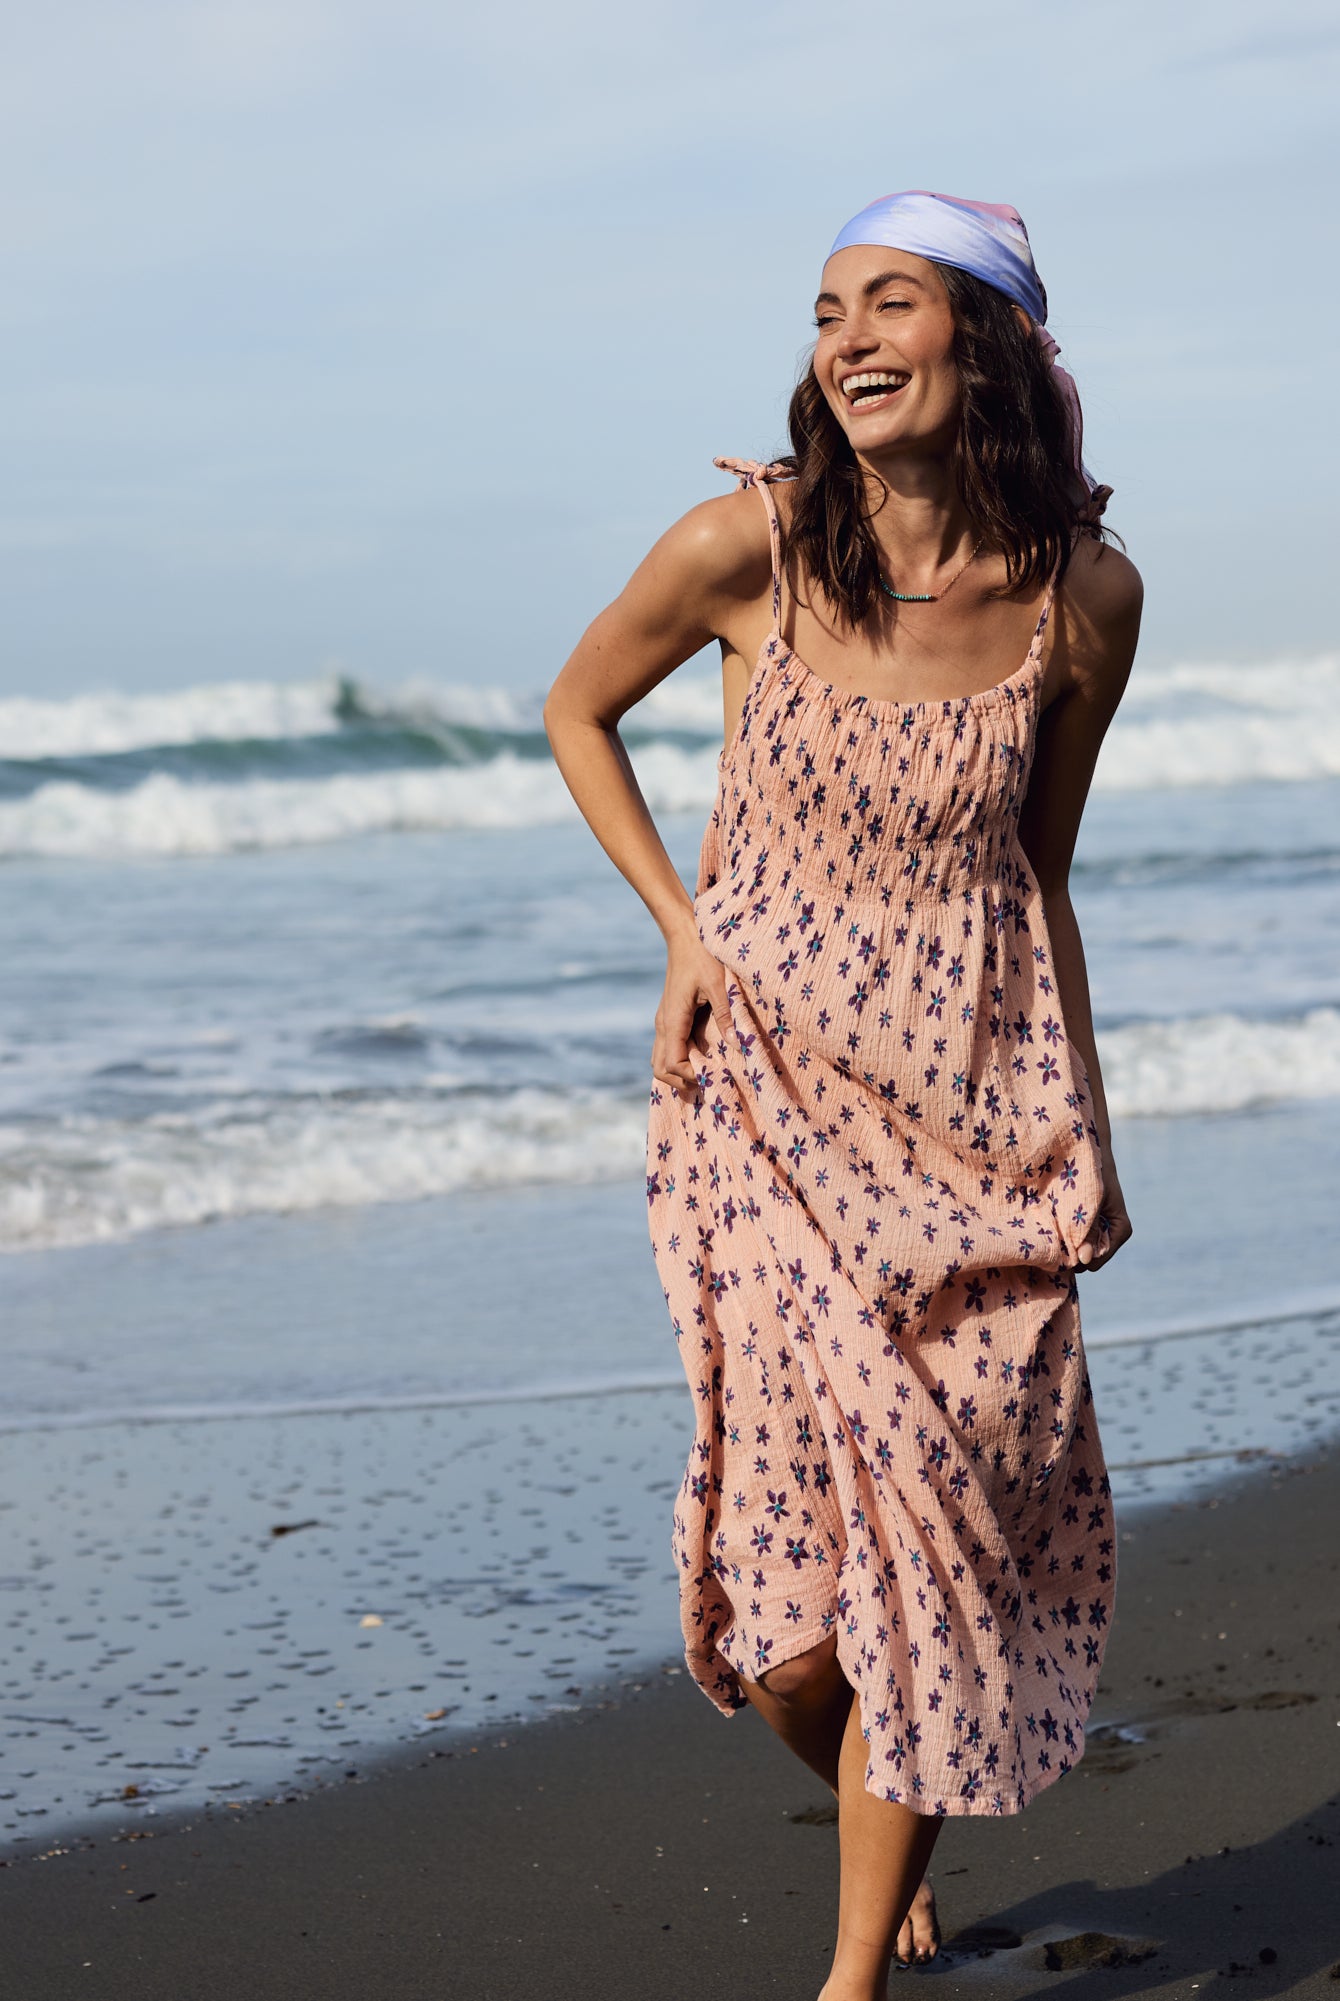 California Boho Style: Embrace Your Wanderlust with Boho Outfits for Festivals